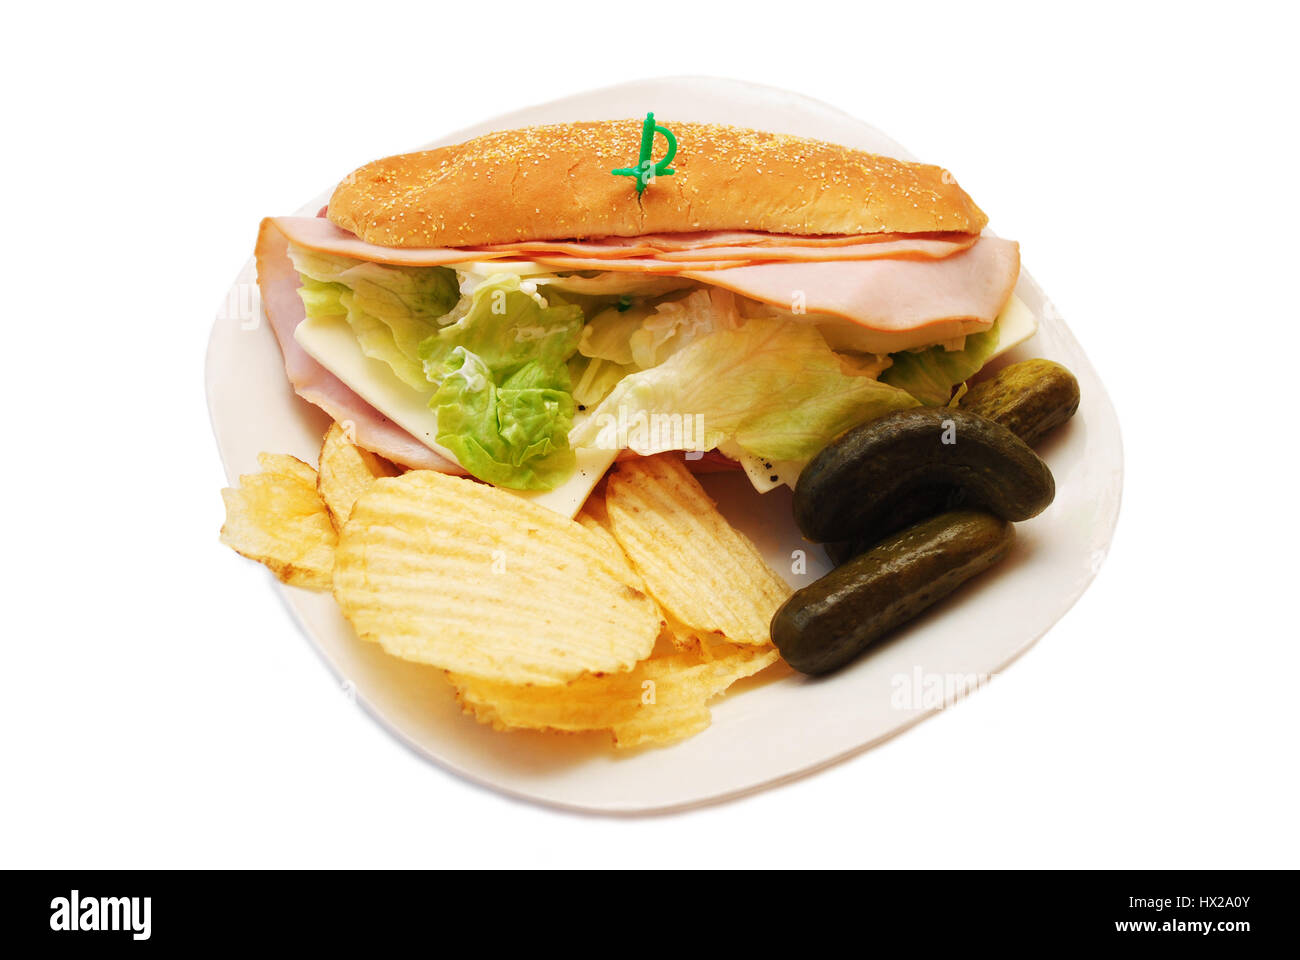 Page 3 - Sub Sandwich High Resolution Stock Photography and Images - Alamy